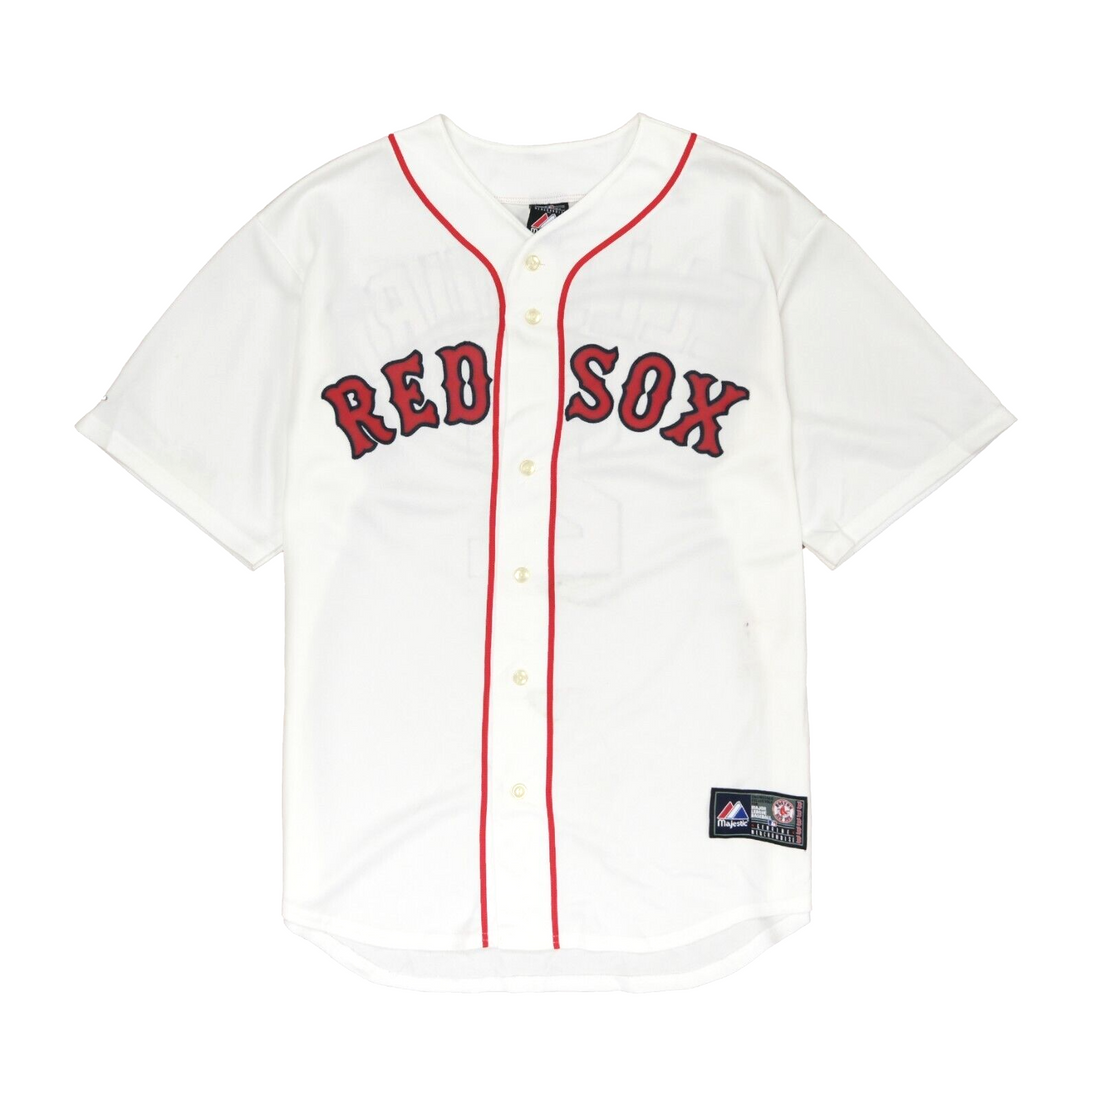 jacoby ellsbury red sox jersey